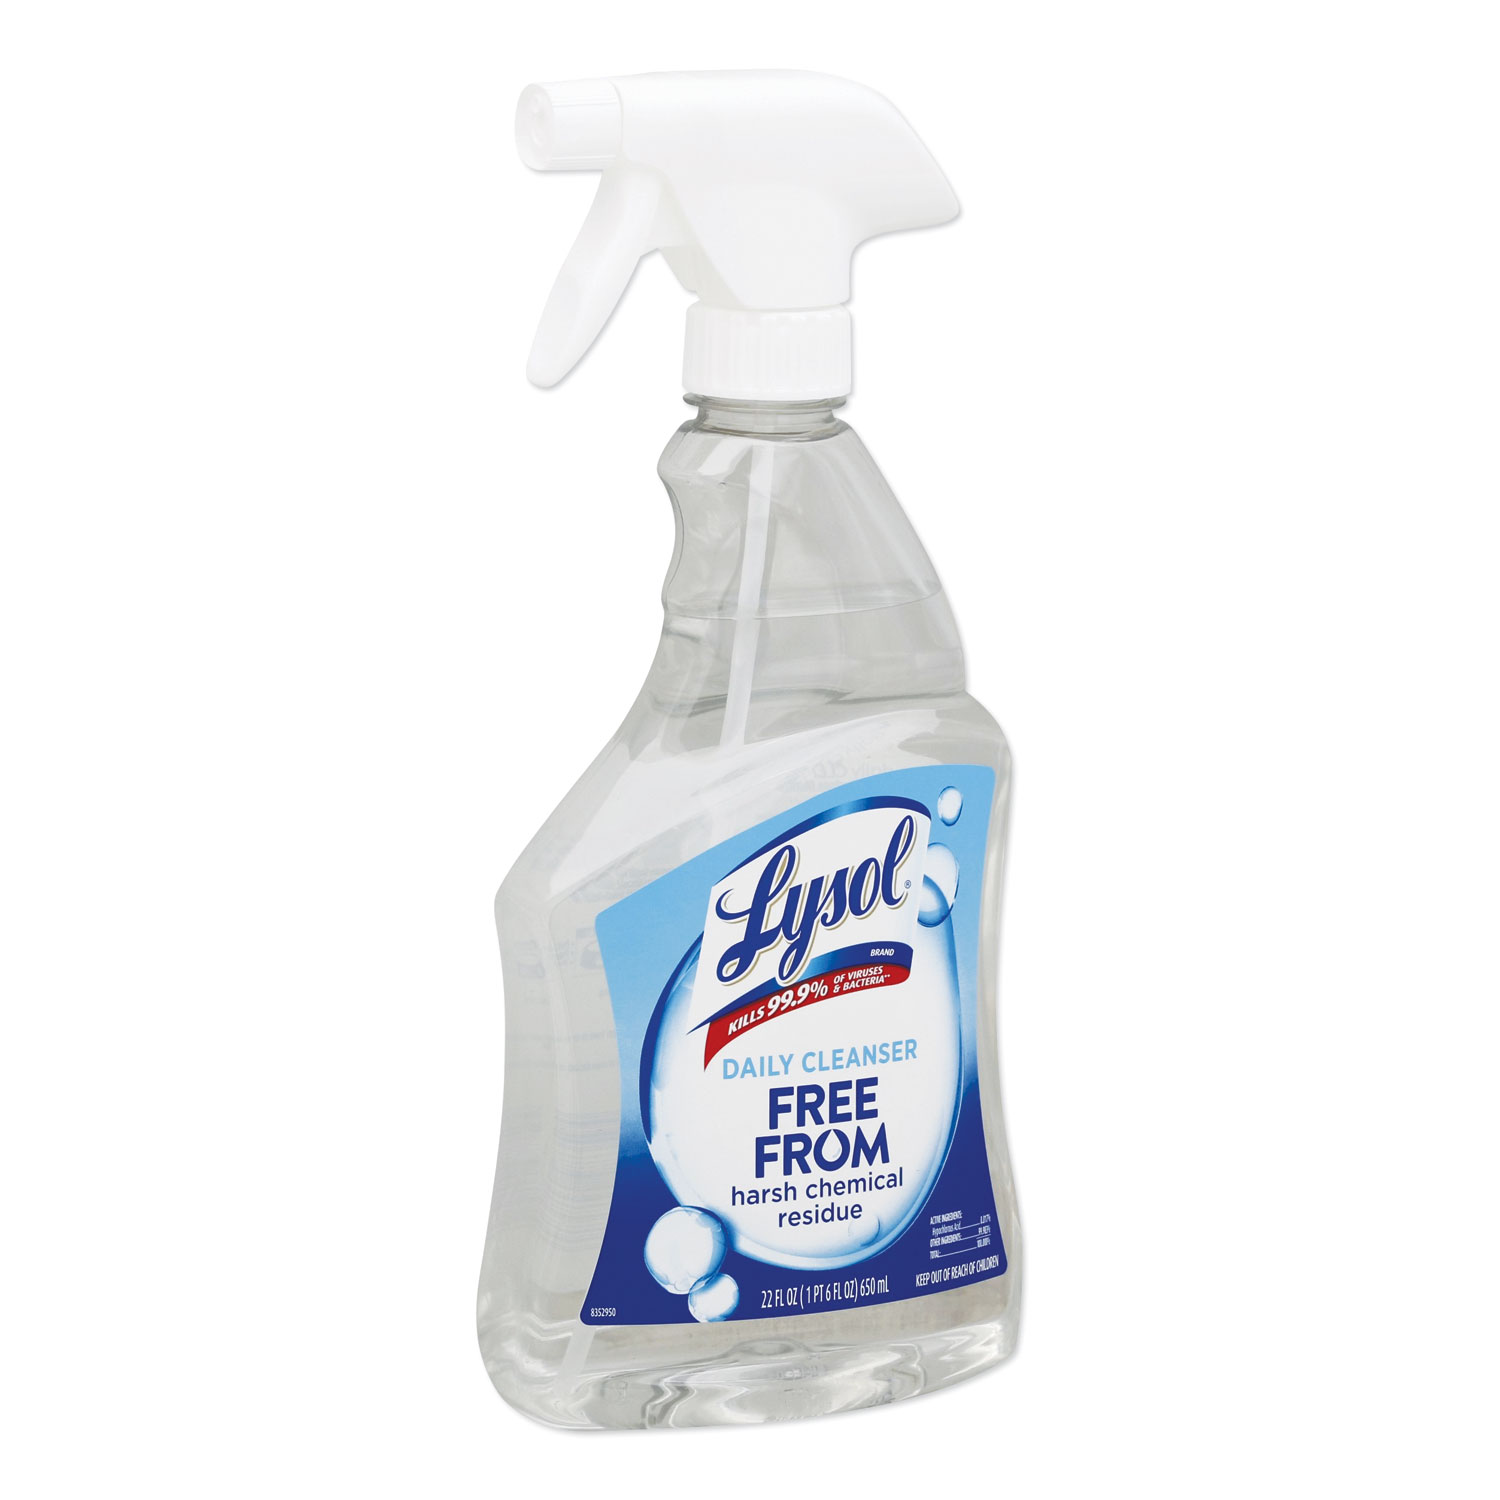  LYSOL Brand 19200-98359 Daily Cleanser, Unscented, 22 oz Spray Bottle (RAC98359EA) 